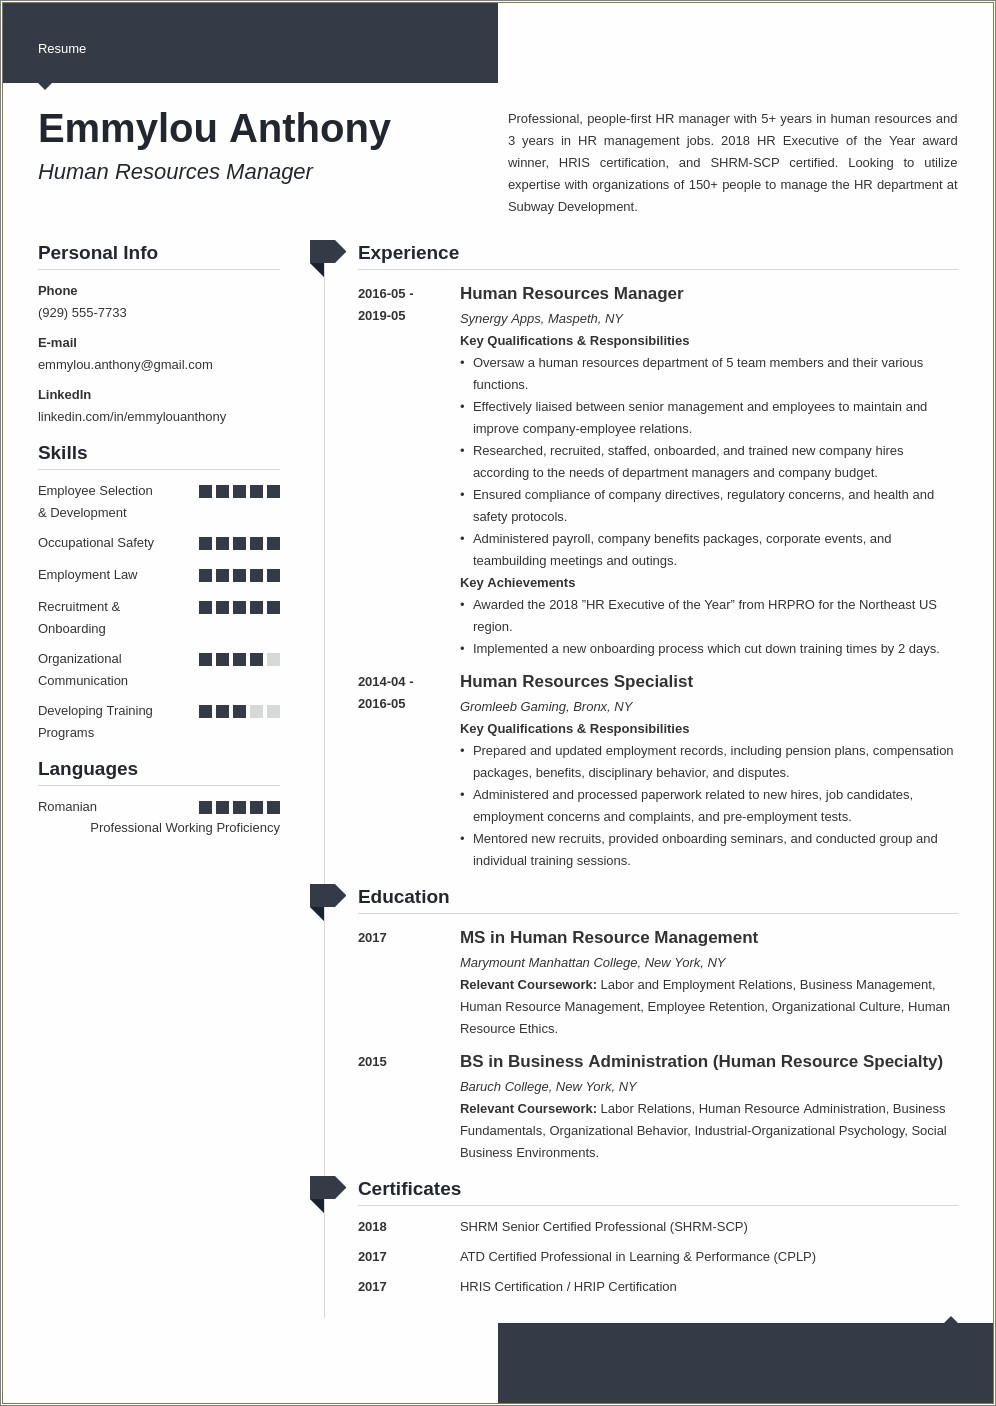 Human Resources Manager Resume Sample Monster